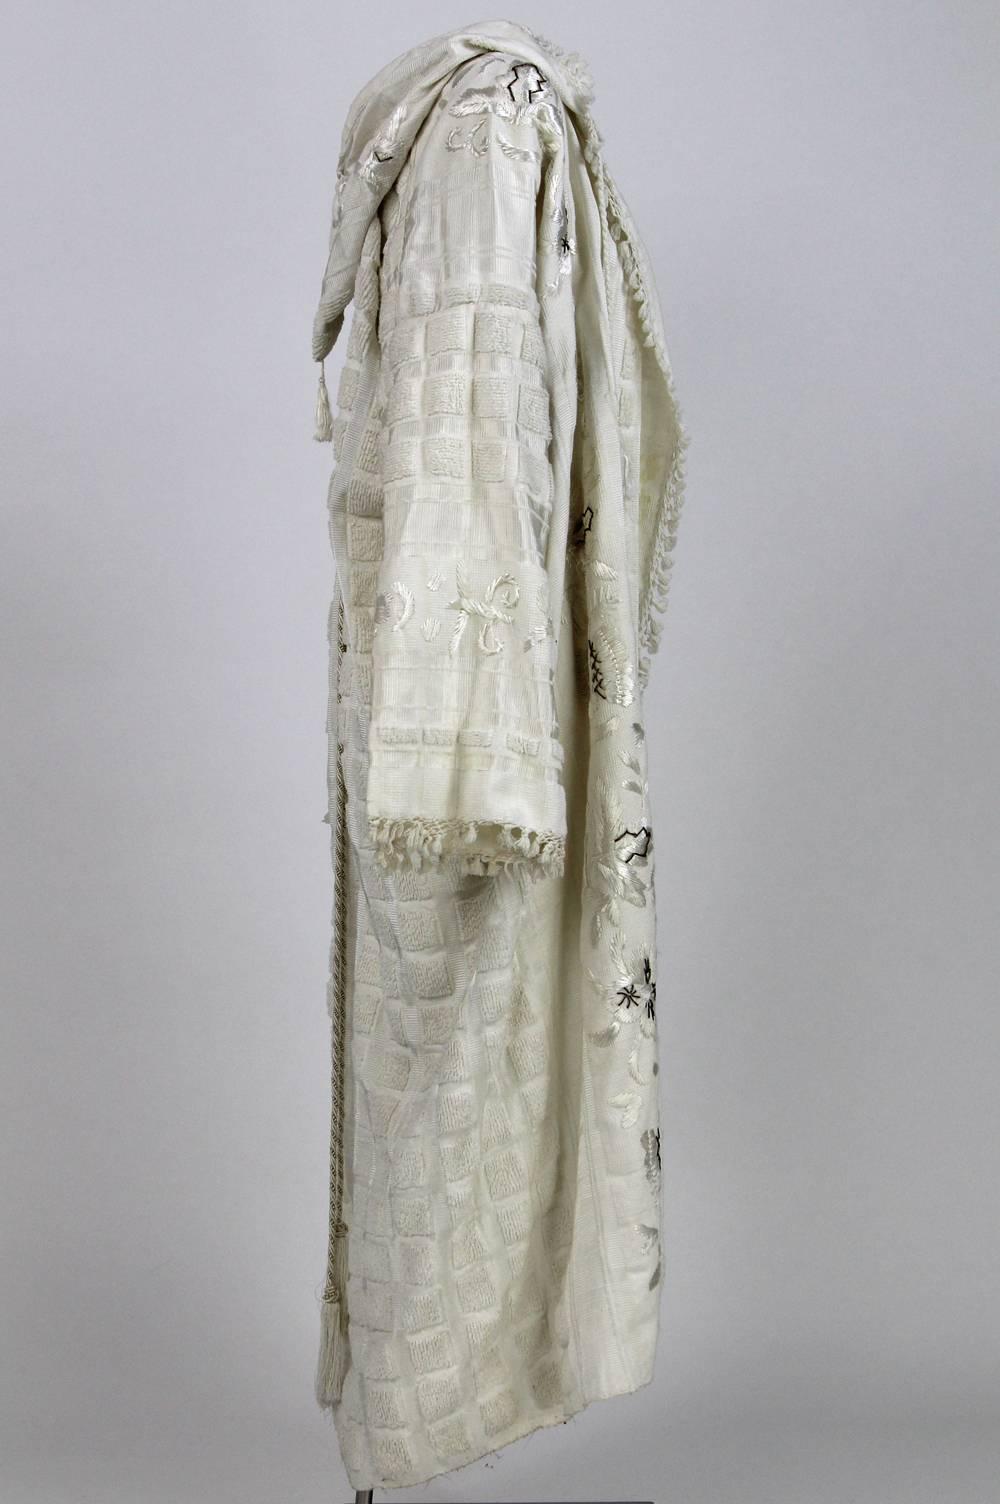 Unique hand-embroidered caftan in white embroidered cotton from the Nineties from South East Asia. Features beautiful white and golden floral embroideries and small tassels on its edges. Good conditions.

Measurements:
Height: 133 cm
Sleeve: 63